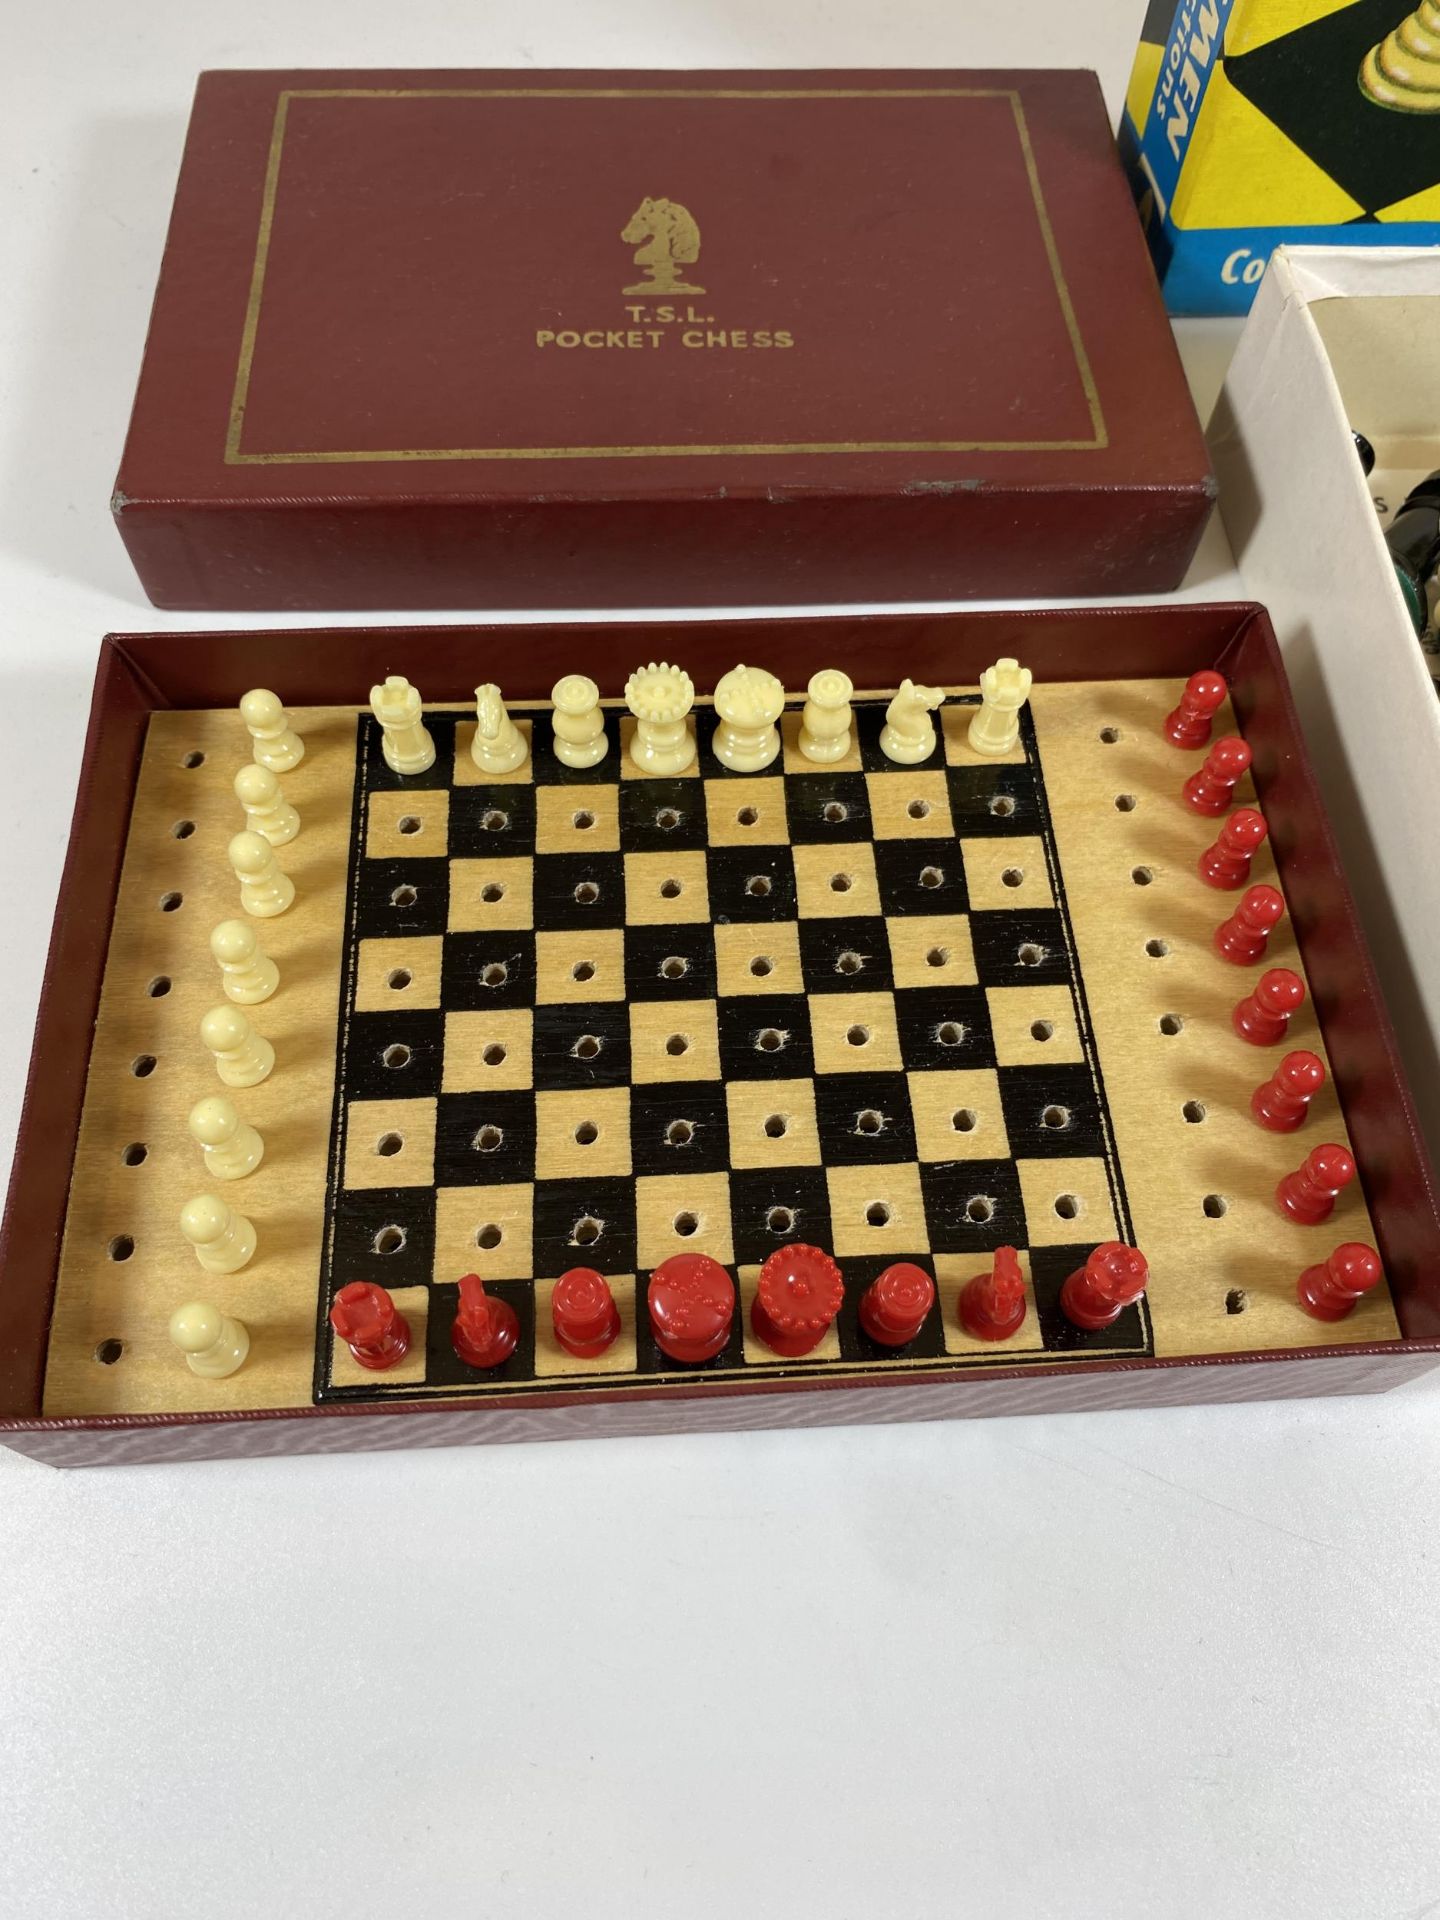 TWO CHESS SETS - BOXED PLASTIC CHESSMEN AND T.S.L TRAVELLING SET, BOTH COMPLETE - Image 2 of 4